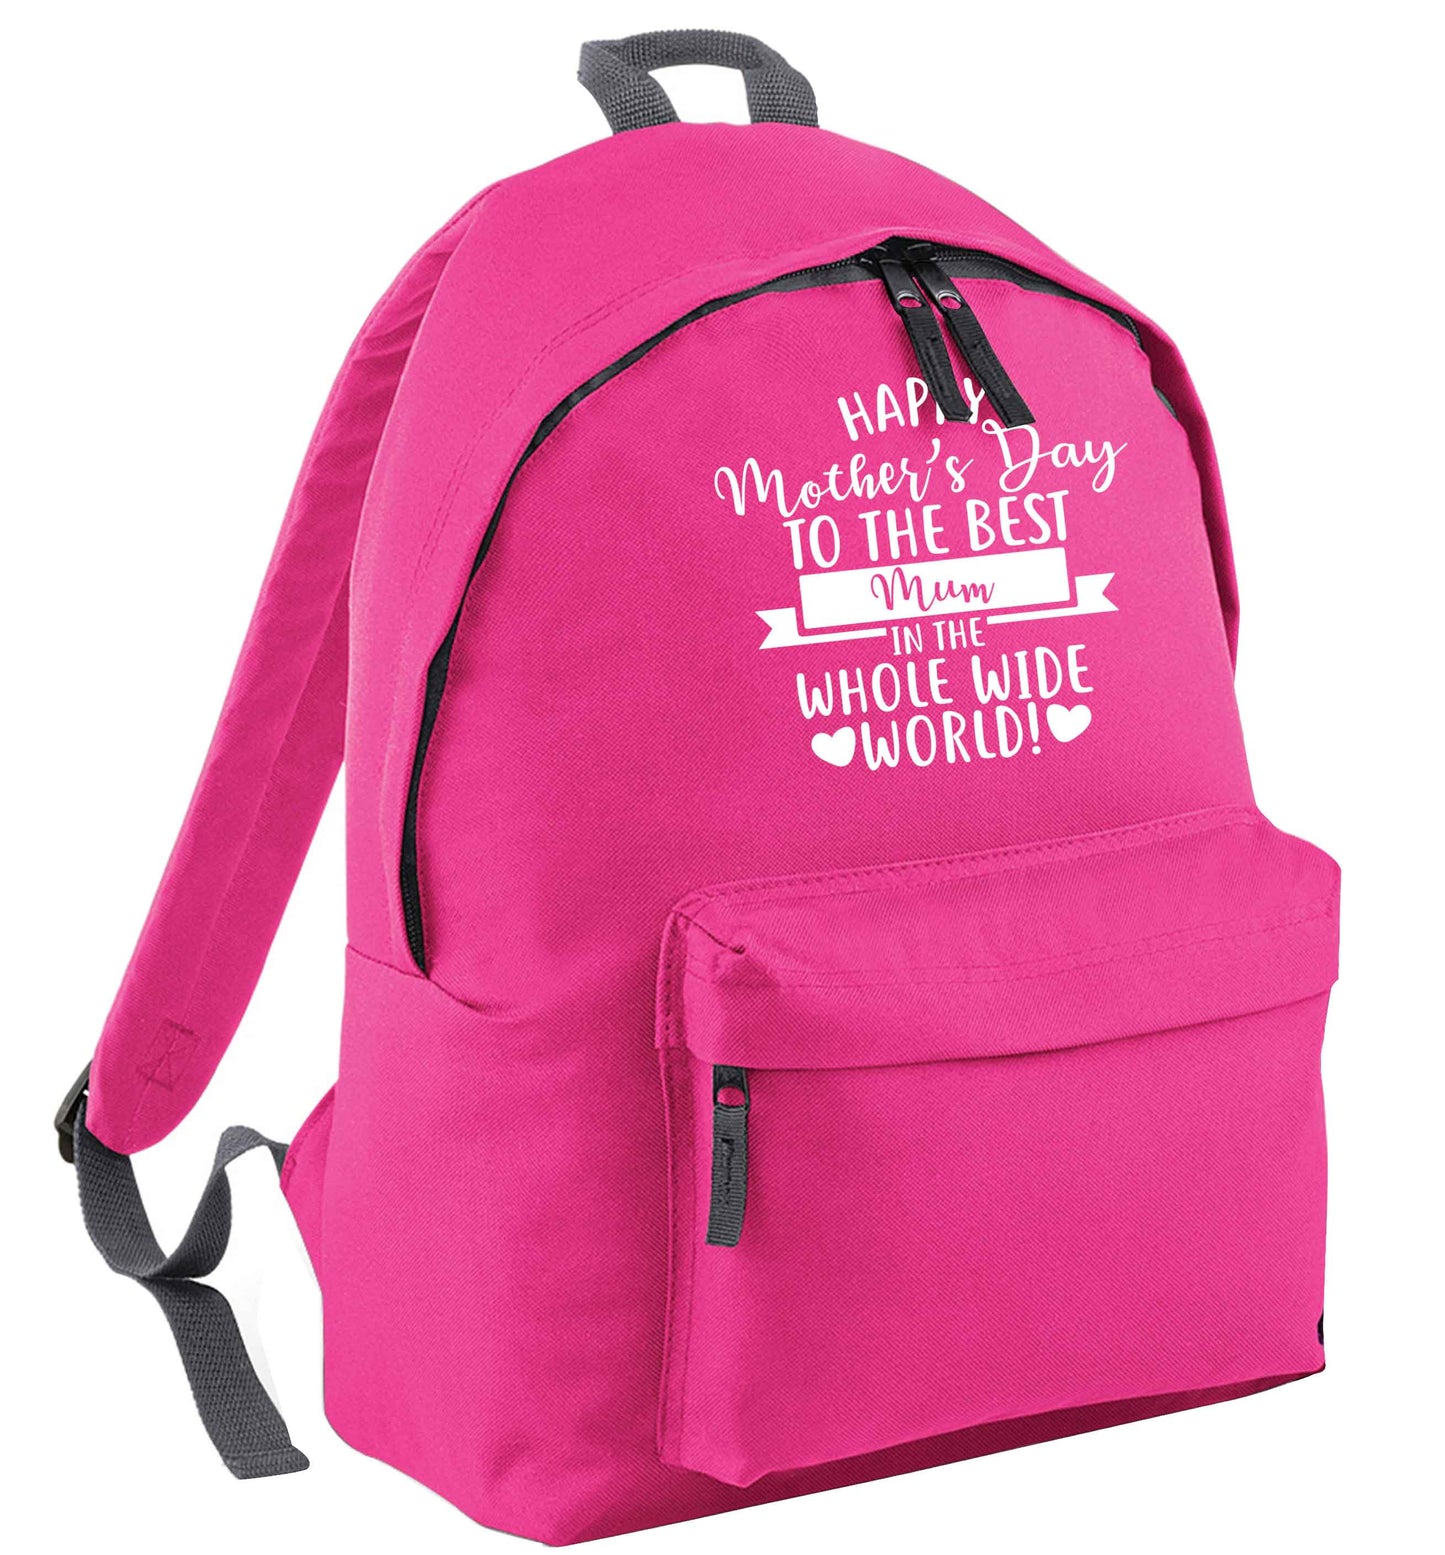 Happy mother's day to the best mum in the world pink childrens backpack